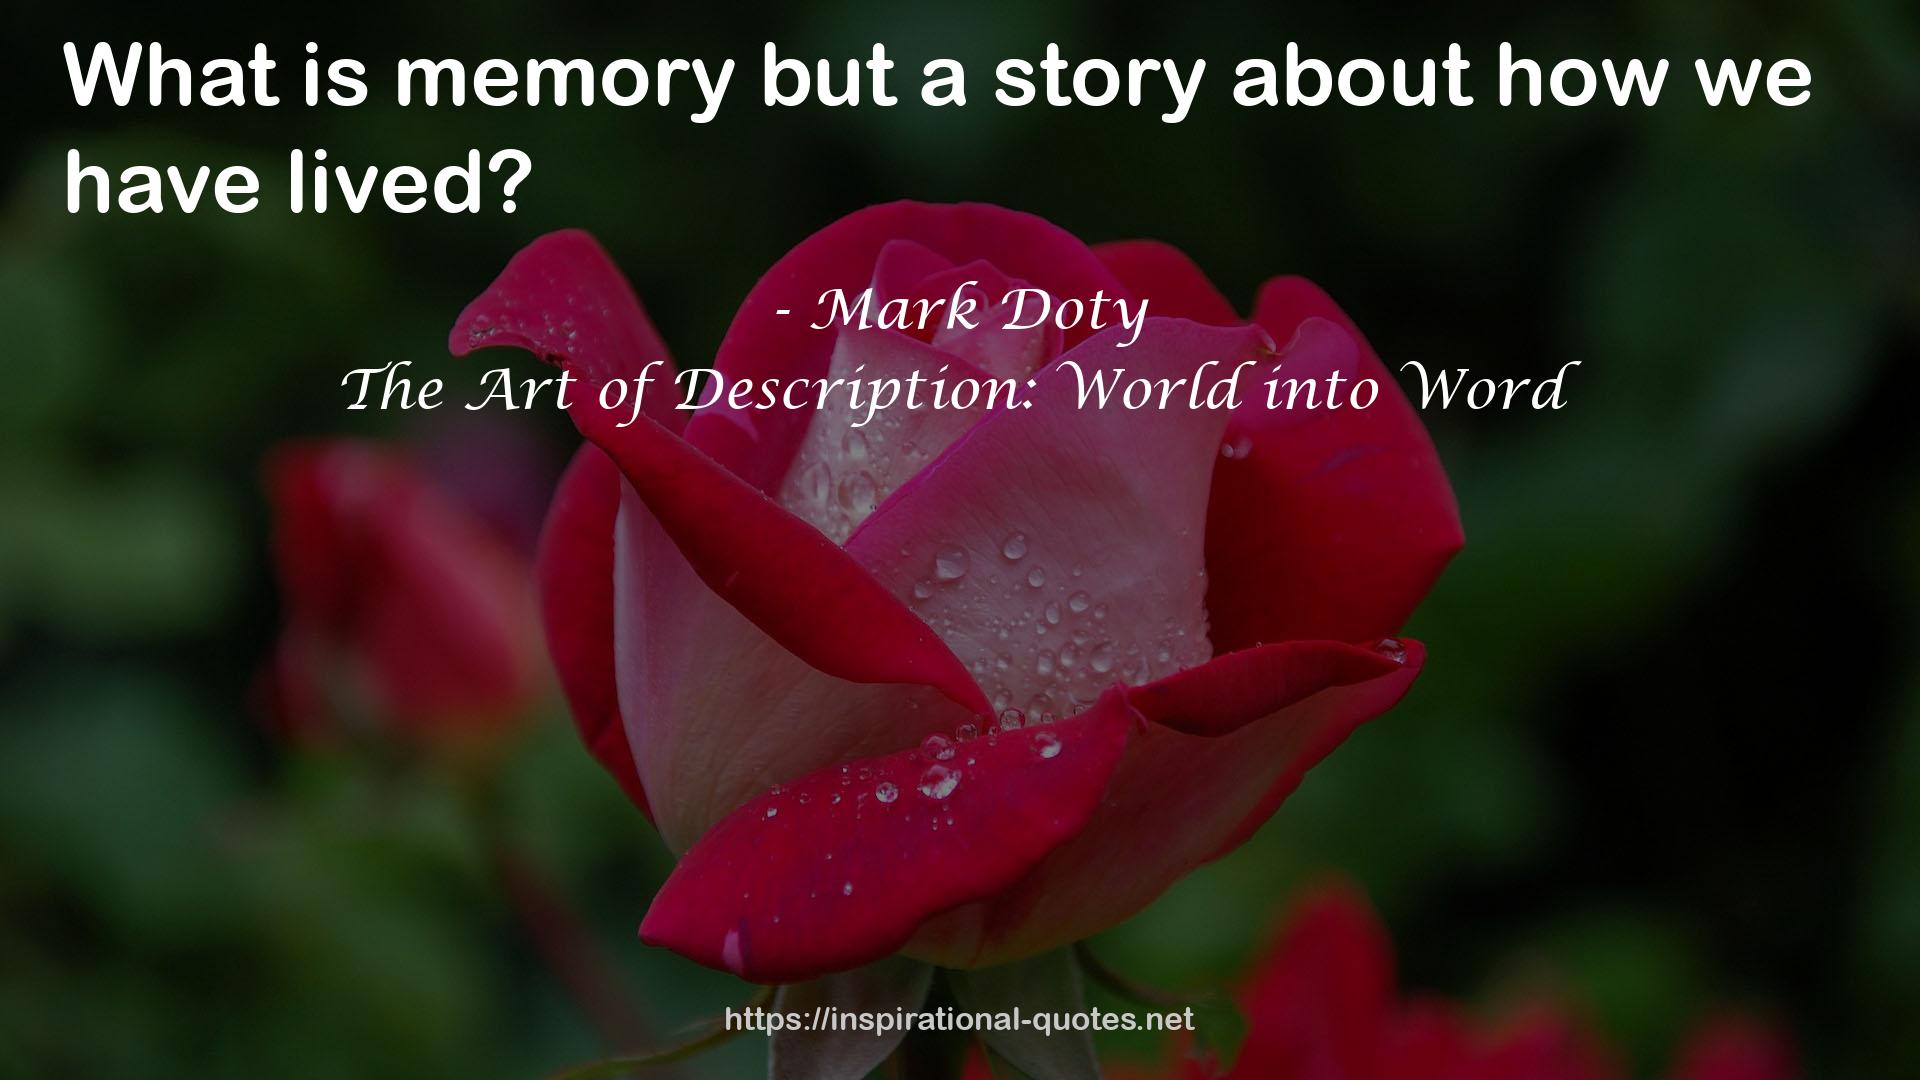 The Art of Description: World into Word QUOTES